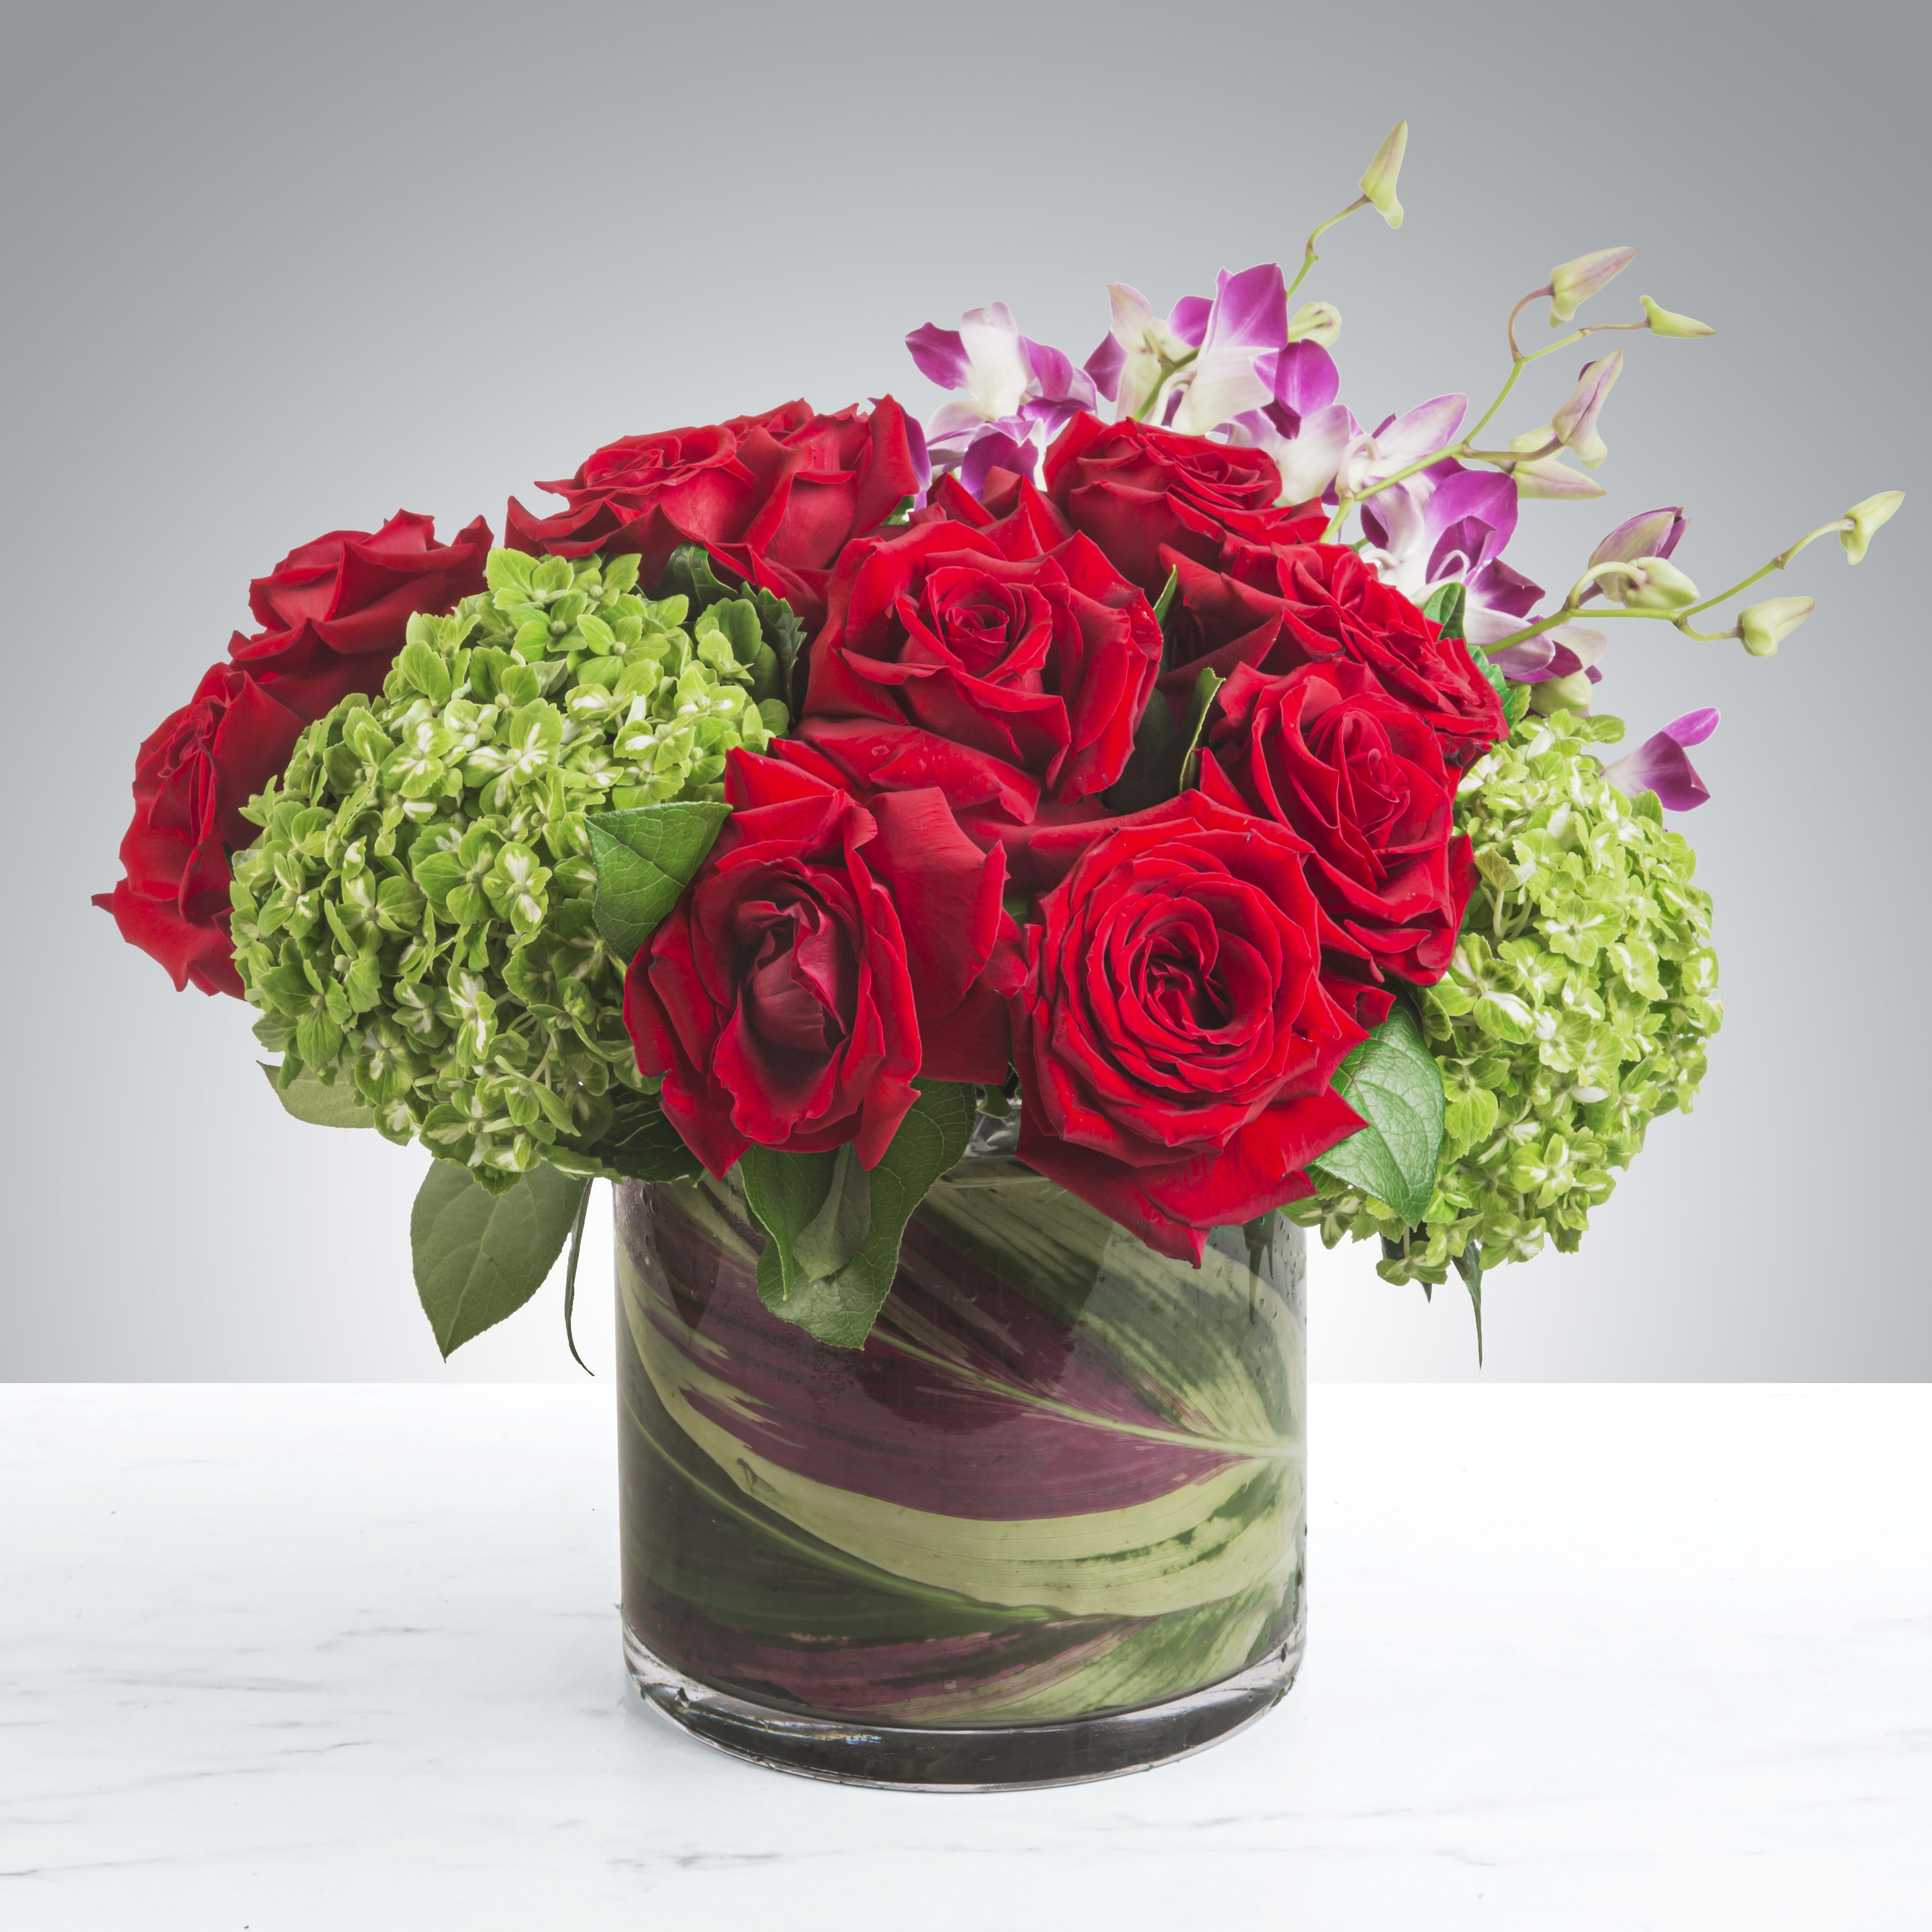 Bejeweled Nights by BloomNation™ - A celebration of luxury and life, this large and jewel toned arrangement is enough to stop anybody in their tracks. Roses, orchids and hydrangeas come together in this purely floral masterpiece.  